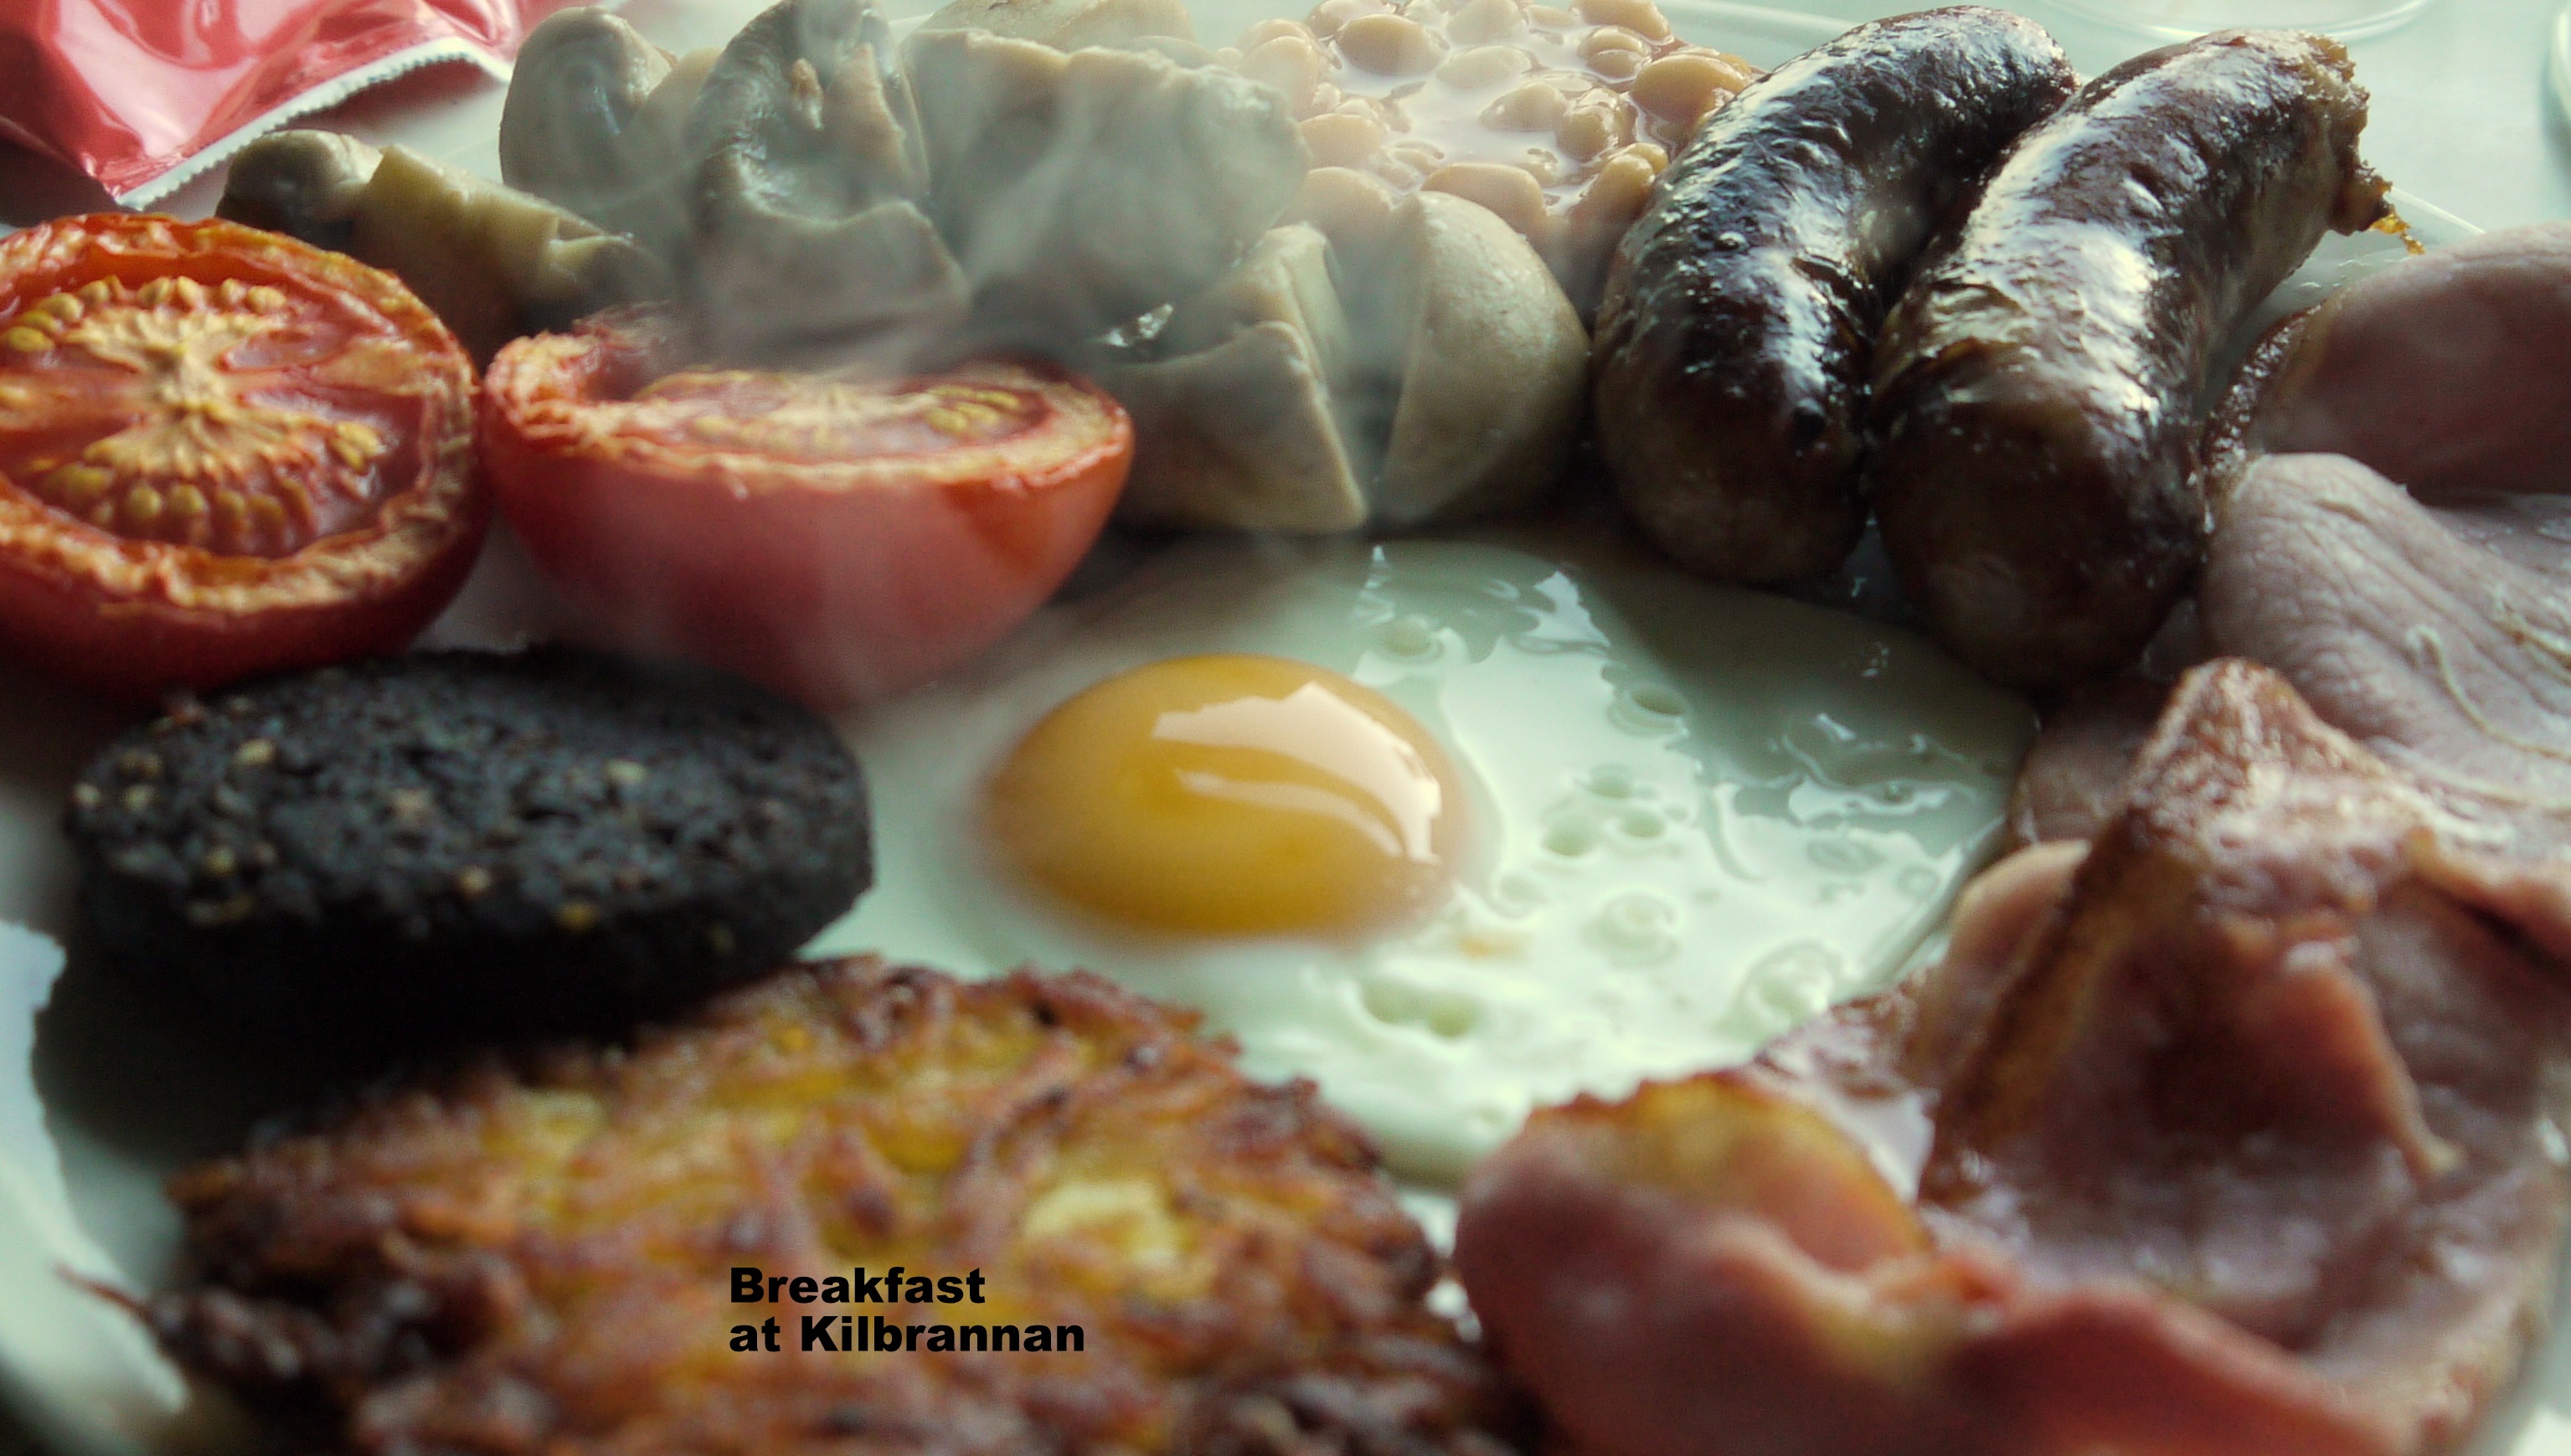 photo of a full english breakfast containing sausages, fried egg, fresh tomatoes, black pudding, hash browns, bacon and mushrooms